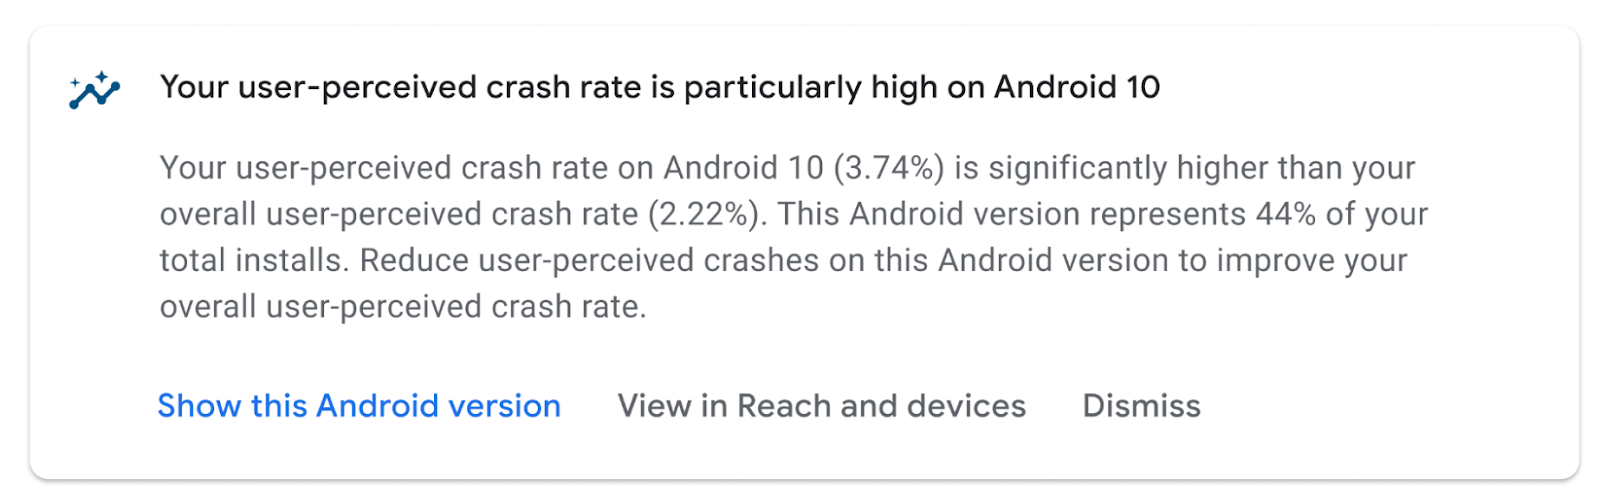 Your user-perceived crash rate is particularly high on Android 10
Your user-perceived crash rate on Android 10 (3.74%) is significantly higher than your overall user-perceived crash rate (2.22%). This Android version represents 44% of your total installs. Reduce user-perceived crashes on this Android version to improve your overall user-perceived crash rate.
Show this Android version
View in Reach and devices
Dismiss